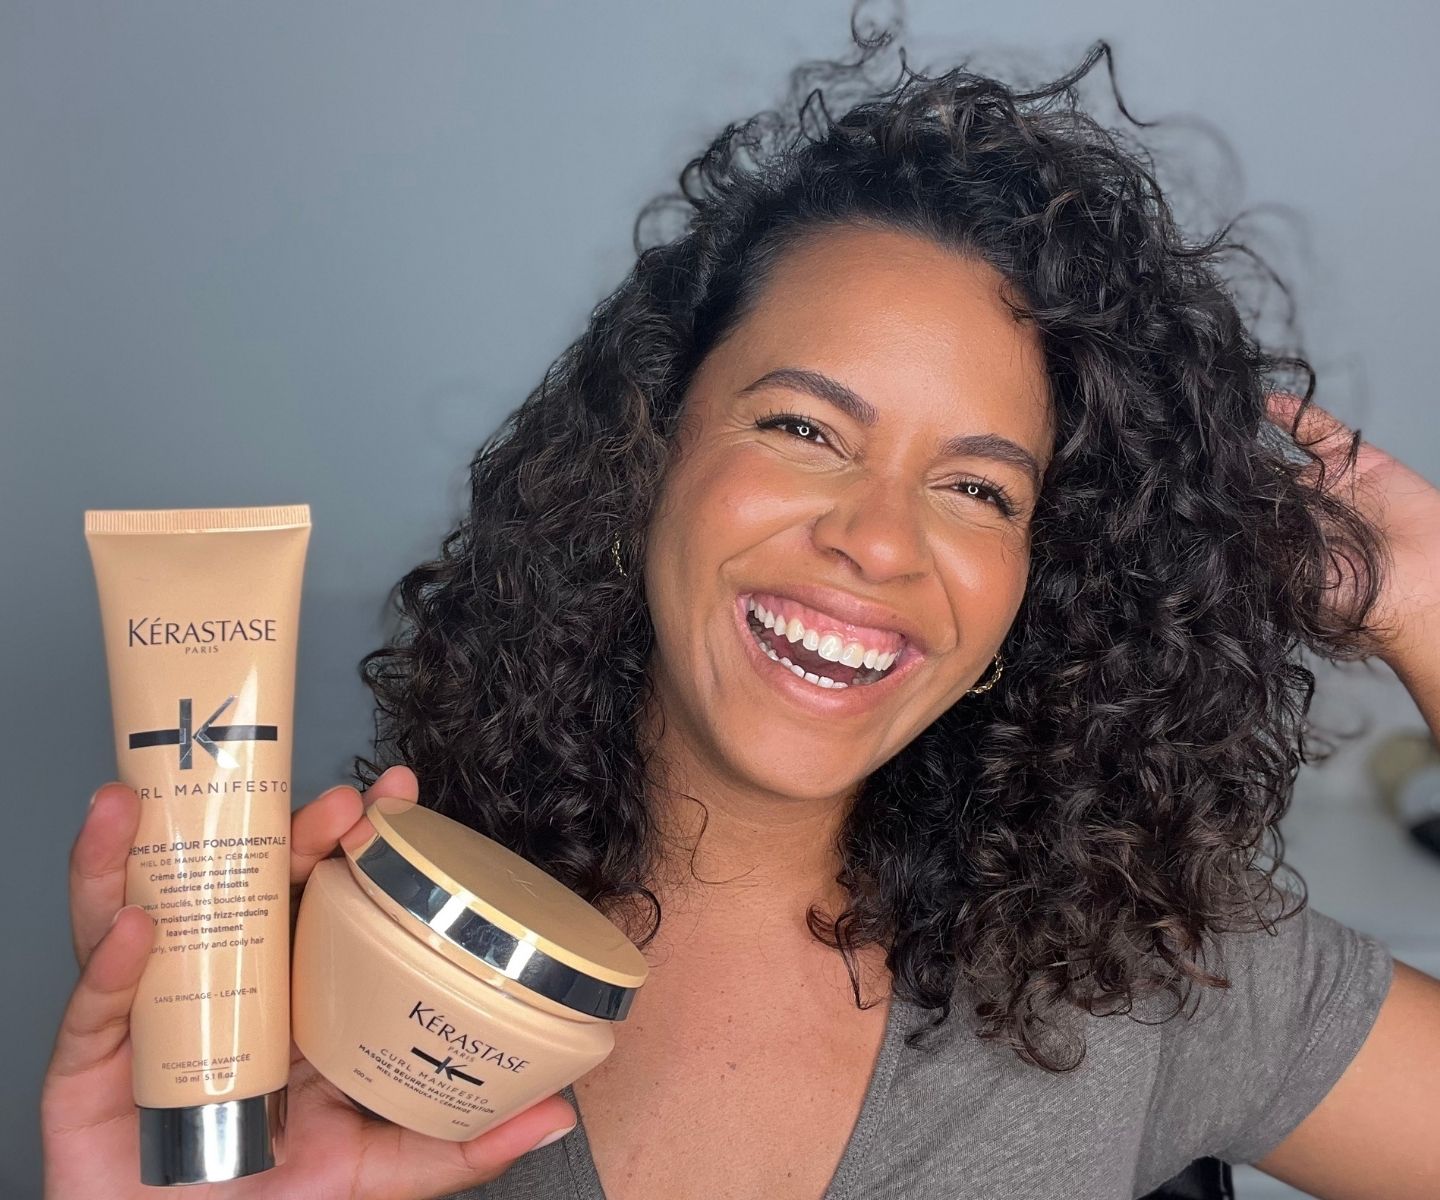 I Tried These New Kérastase Curl Manifesto Products on My Curly,  Frizz-Prone Hair